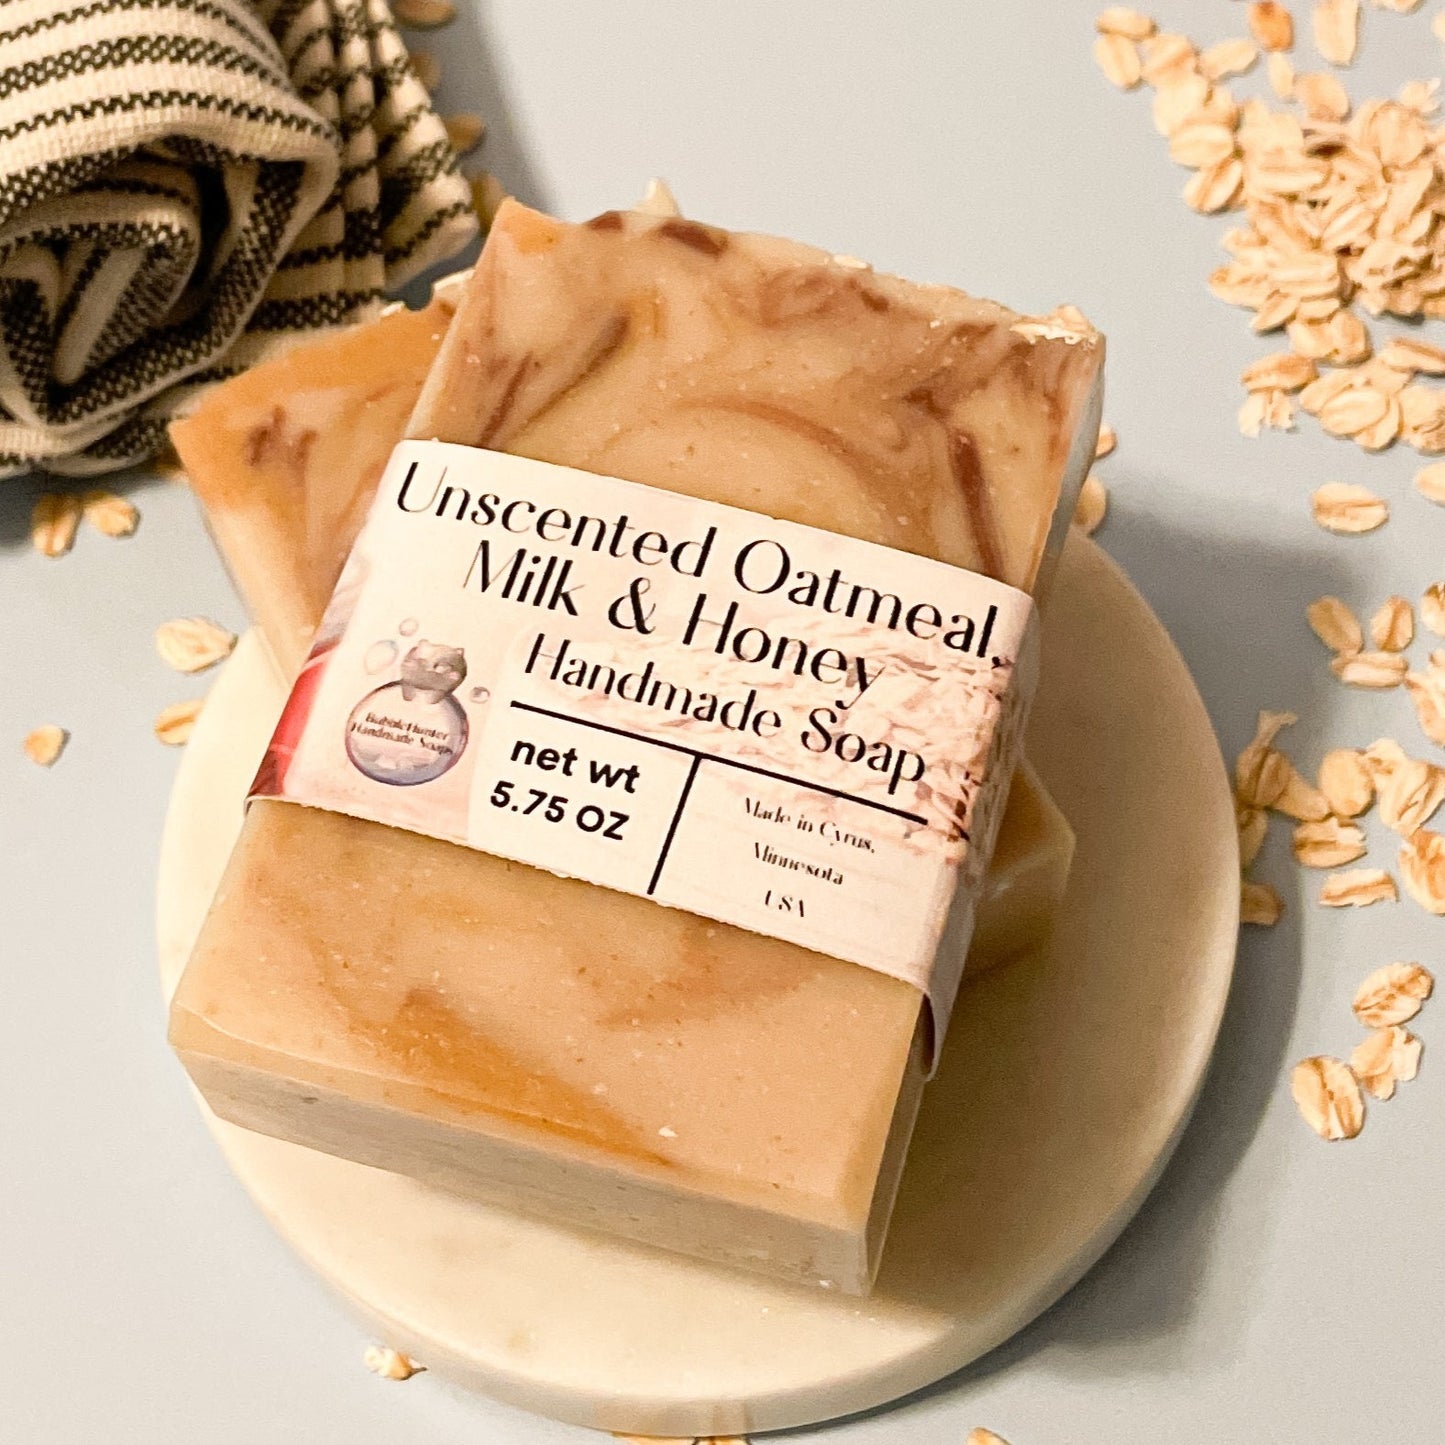 Oatmeal, Milk and Honey Unscented, All Natural Cold Process Handmade Soap Bar